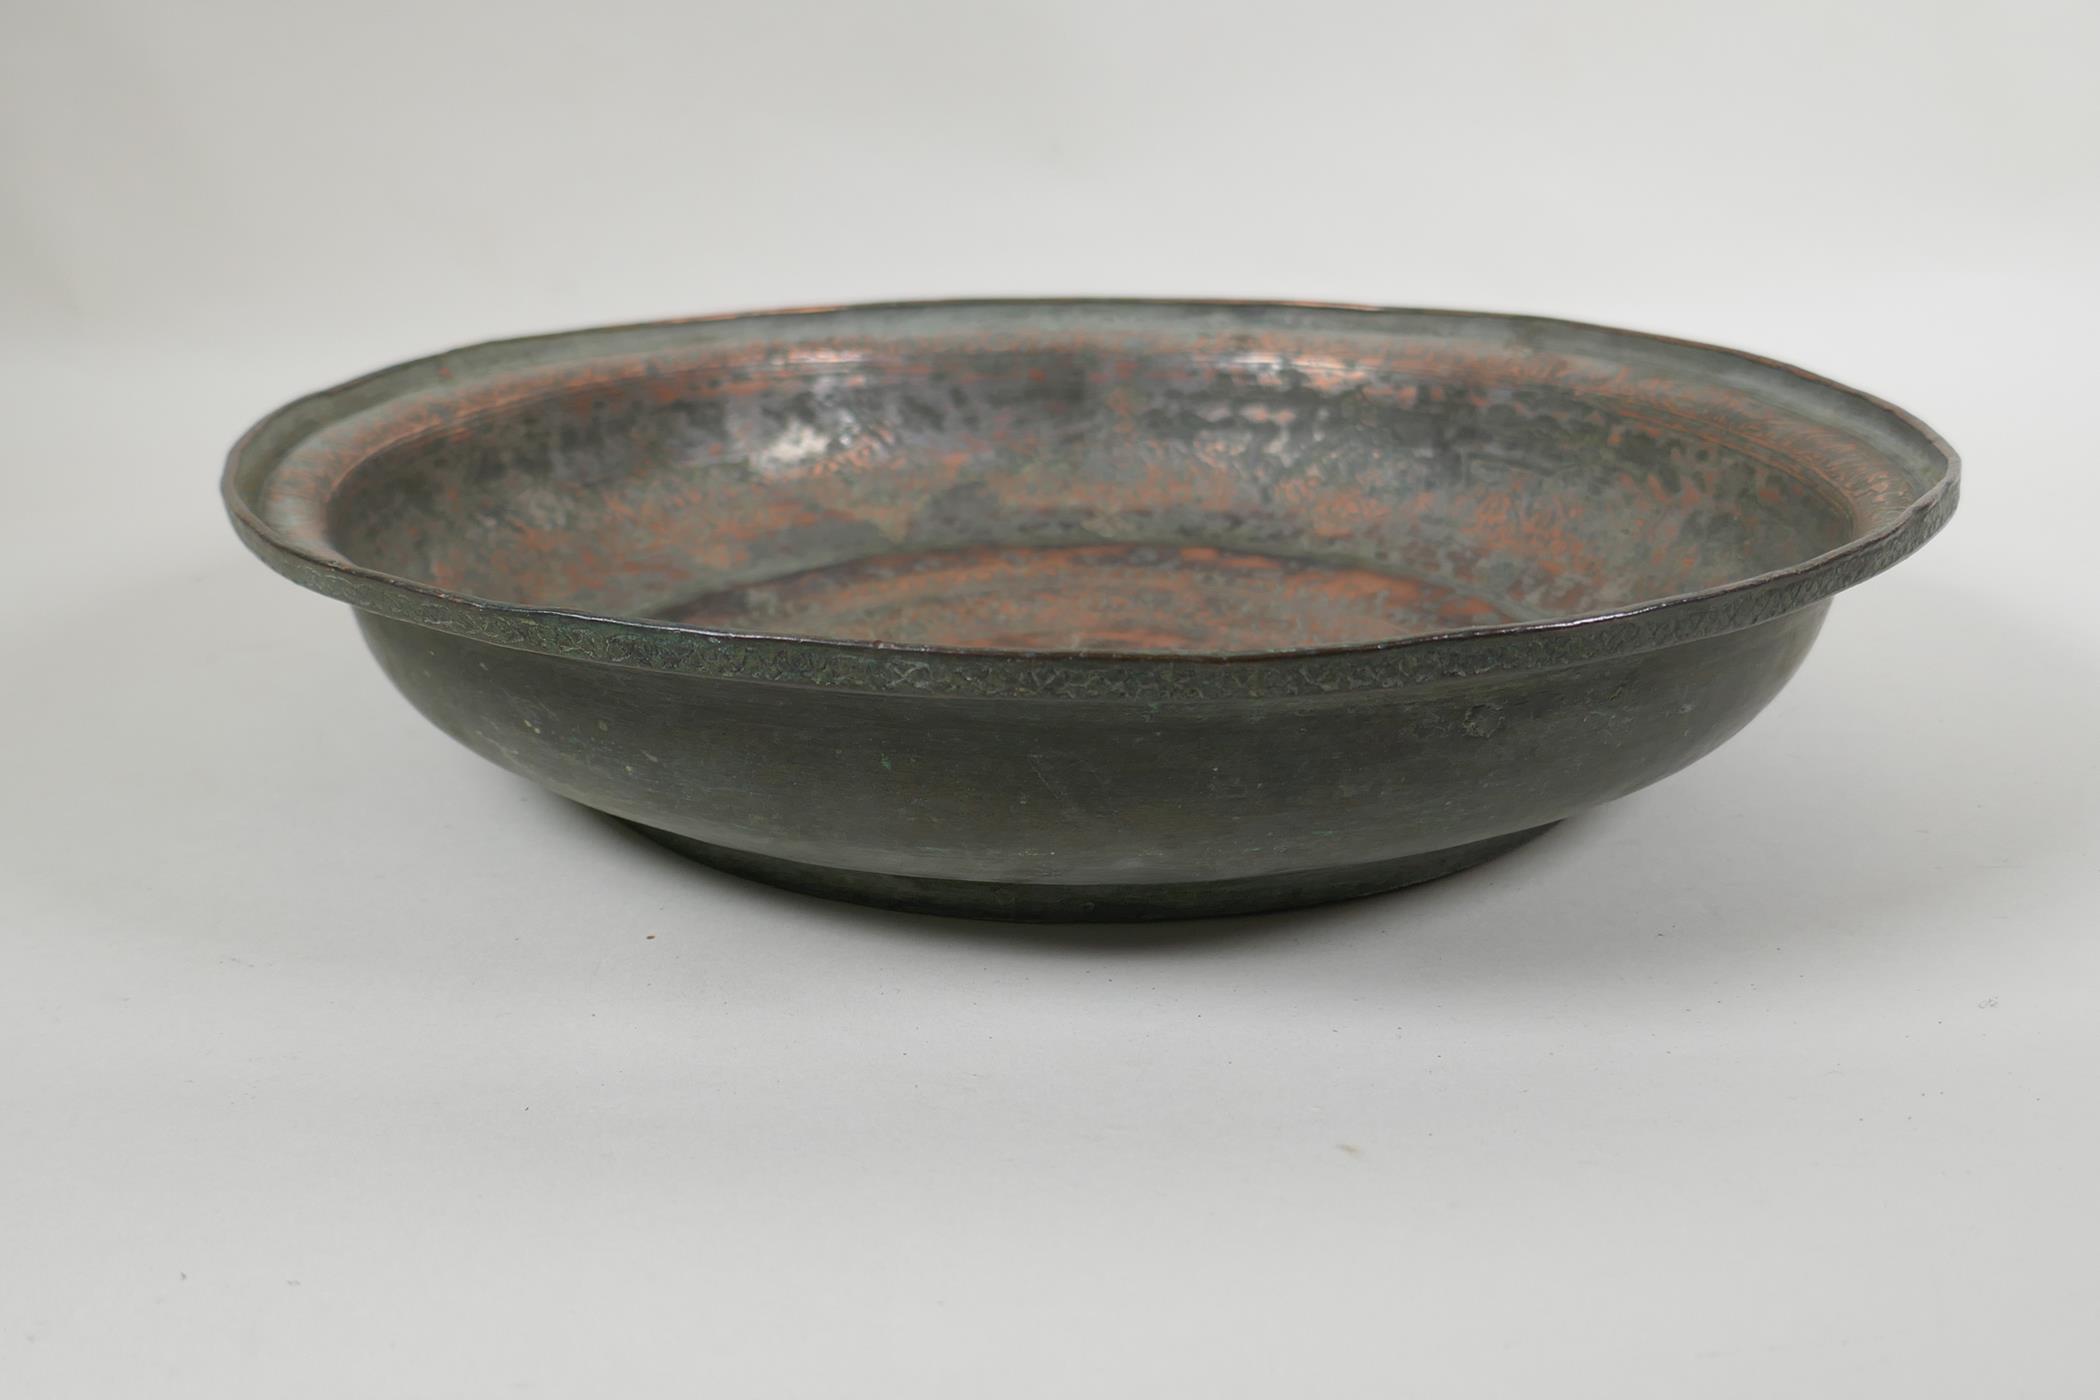 An antique Islamic copper dish with chased script and floral decoration, 34cm diameter - Image 2 of 3